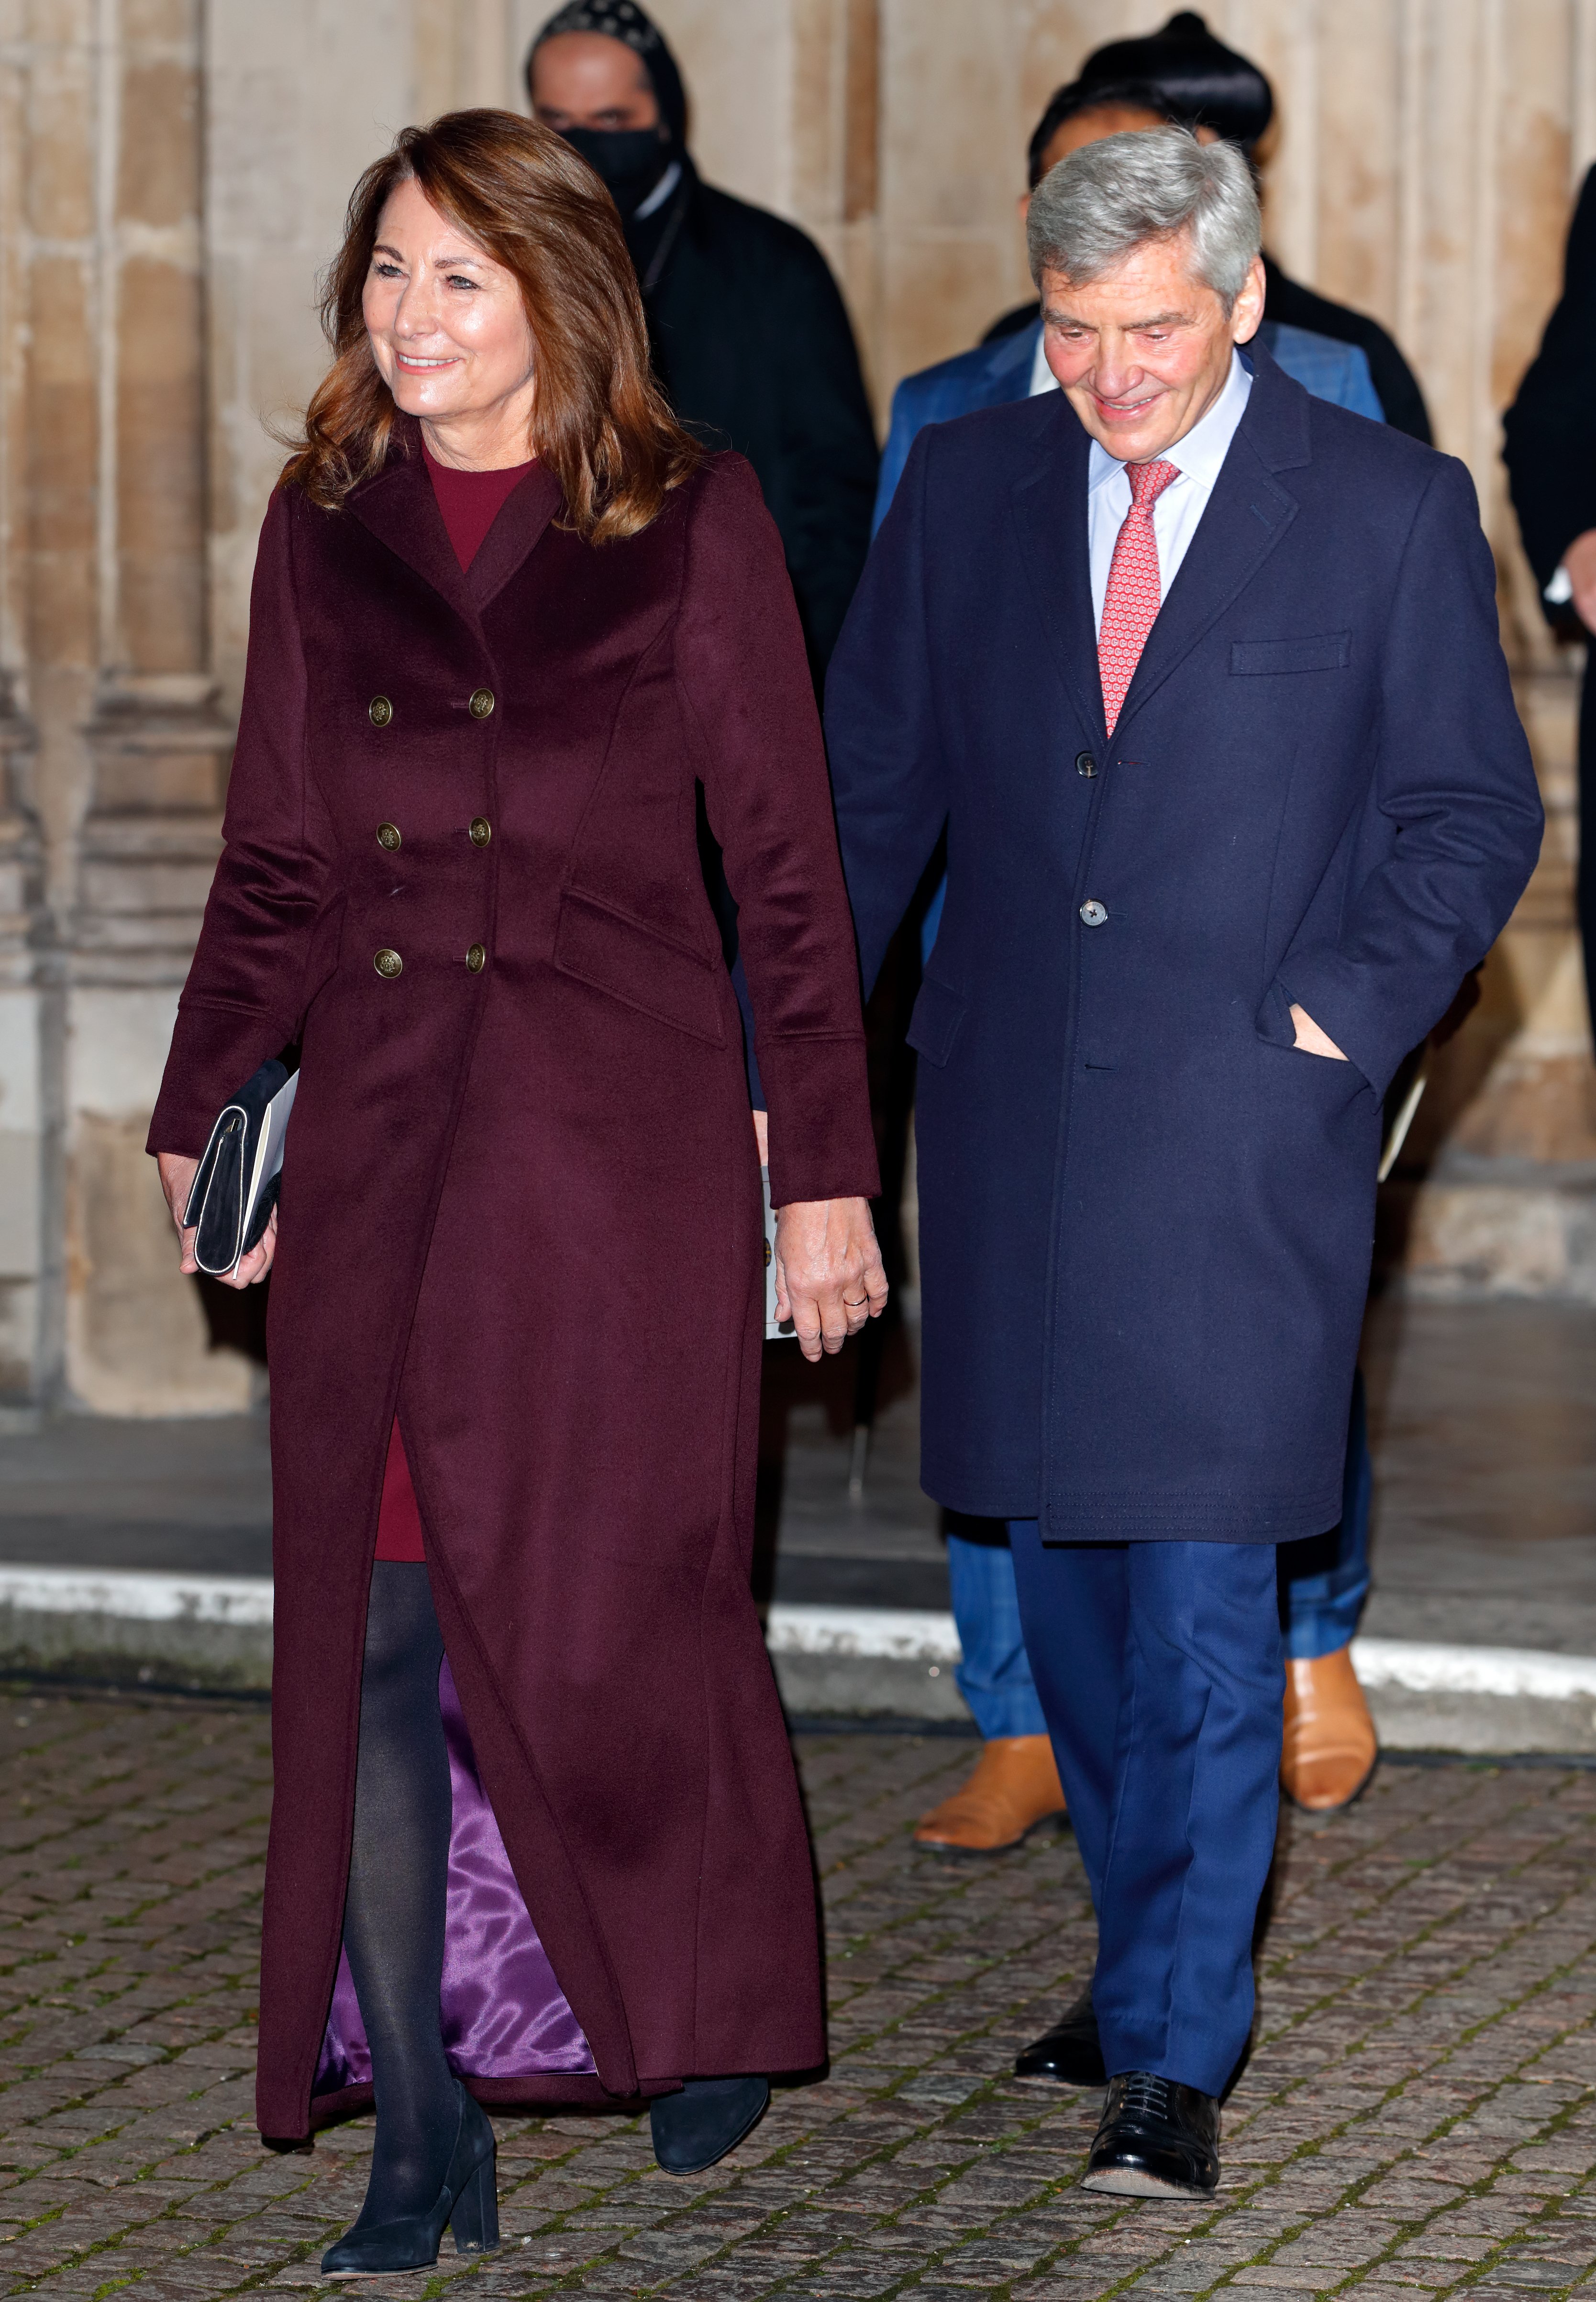 Carole Middleton and Michael Middleton during the "Together at Christmas" community carol service at Westminster Abbey on December 8, 2021 in London, England. / Source: Getty Images